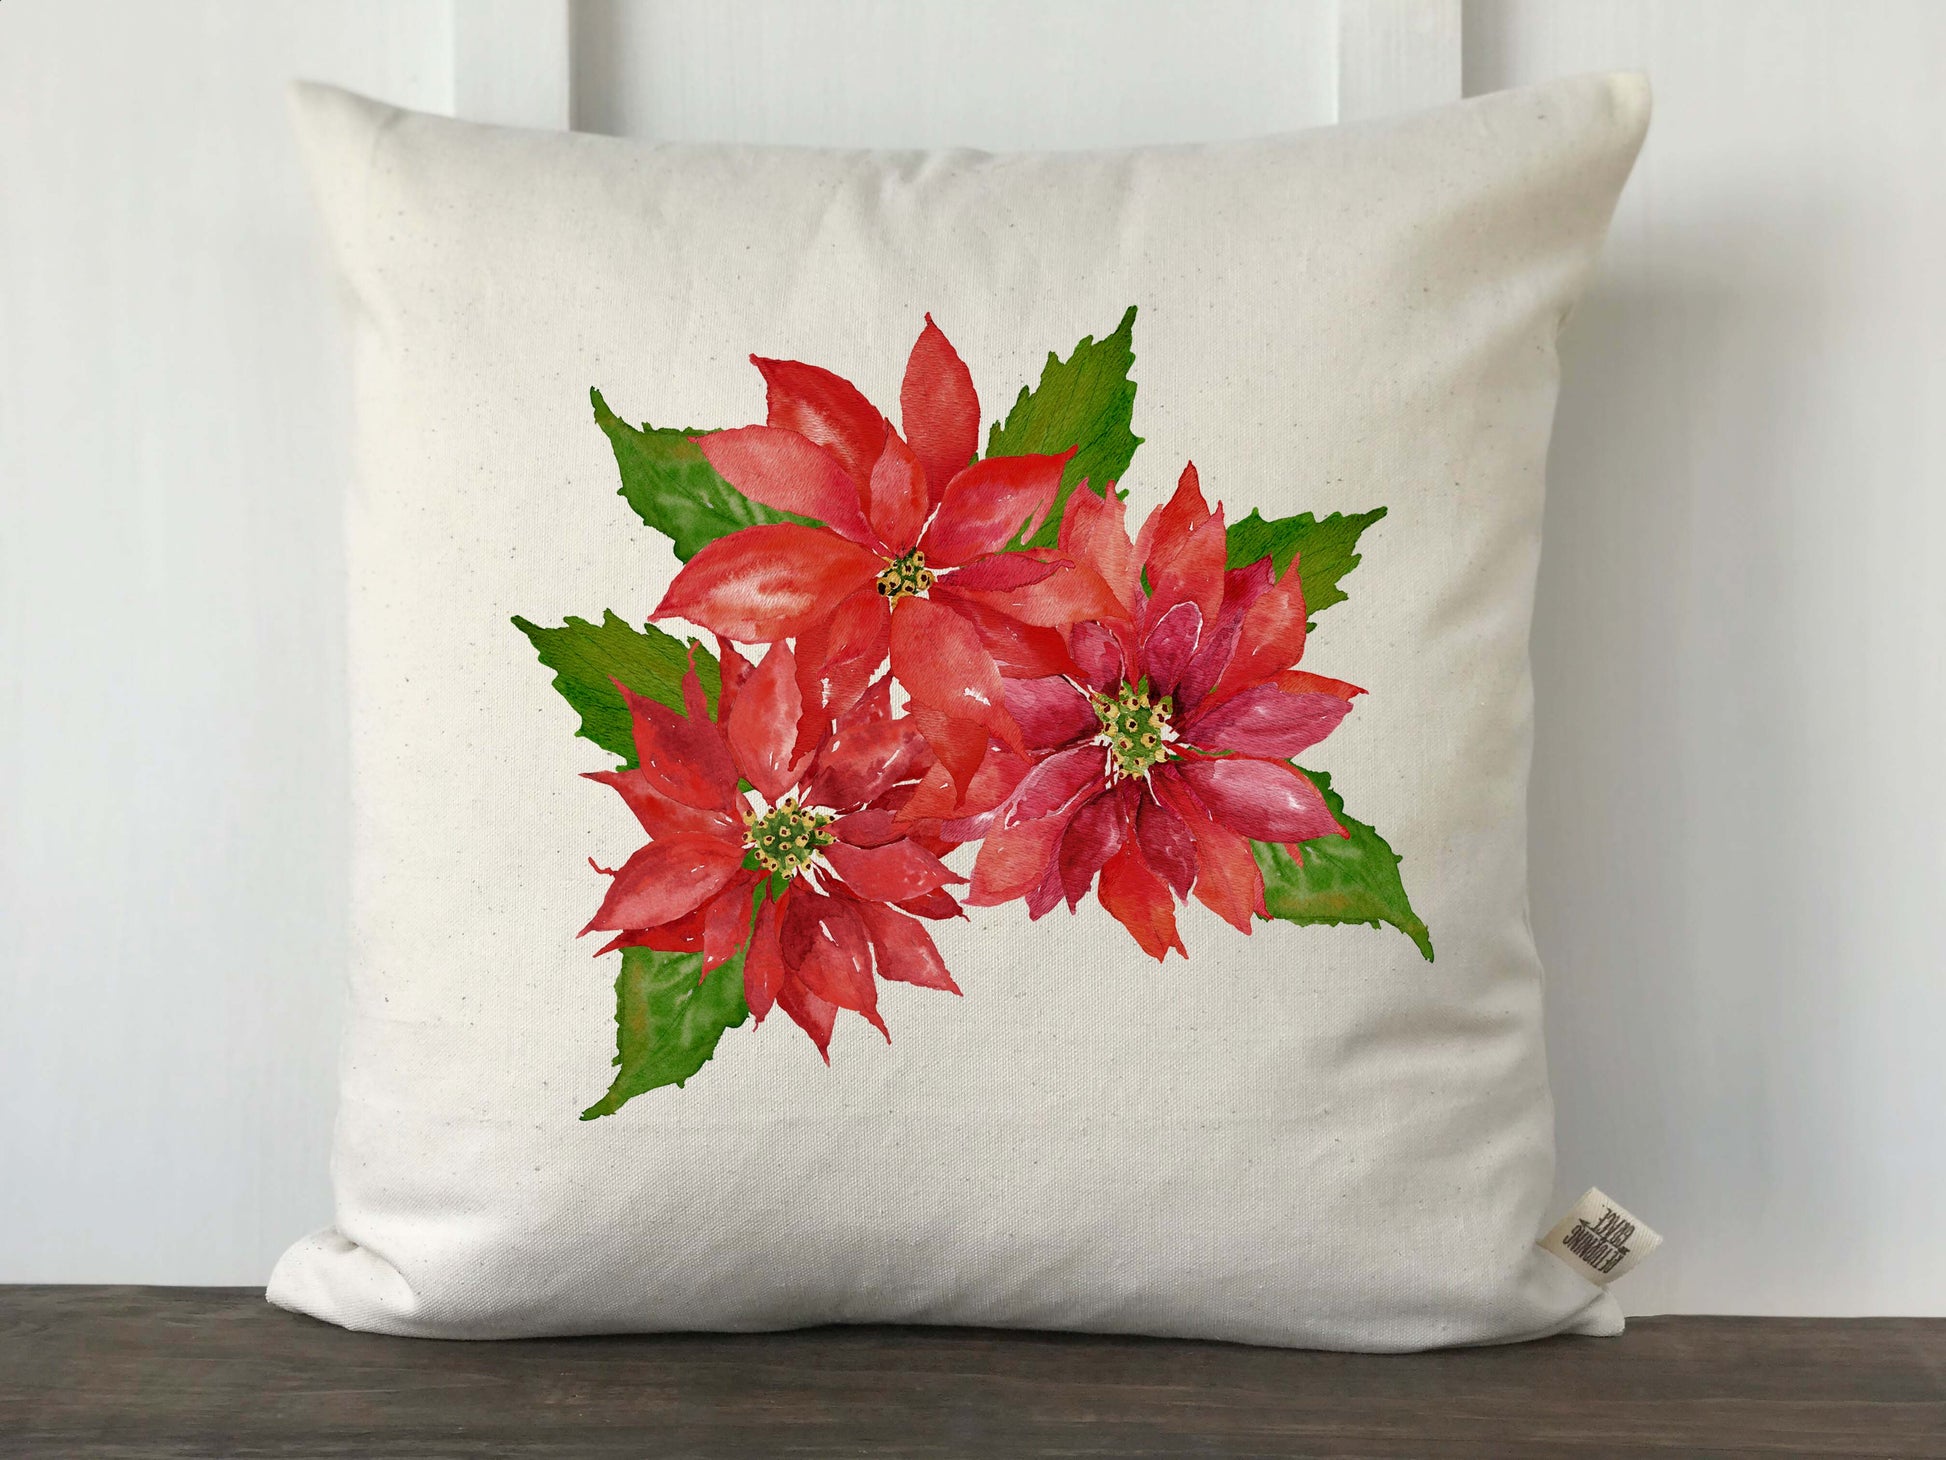 Watercolor Poinsettia Christmas Pillow Cover - Returning Grace Designs